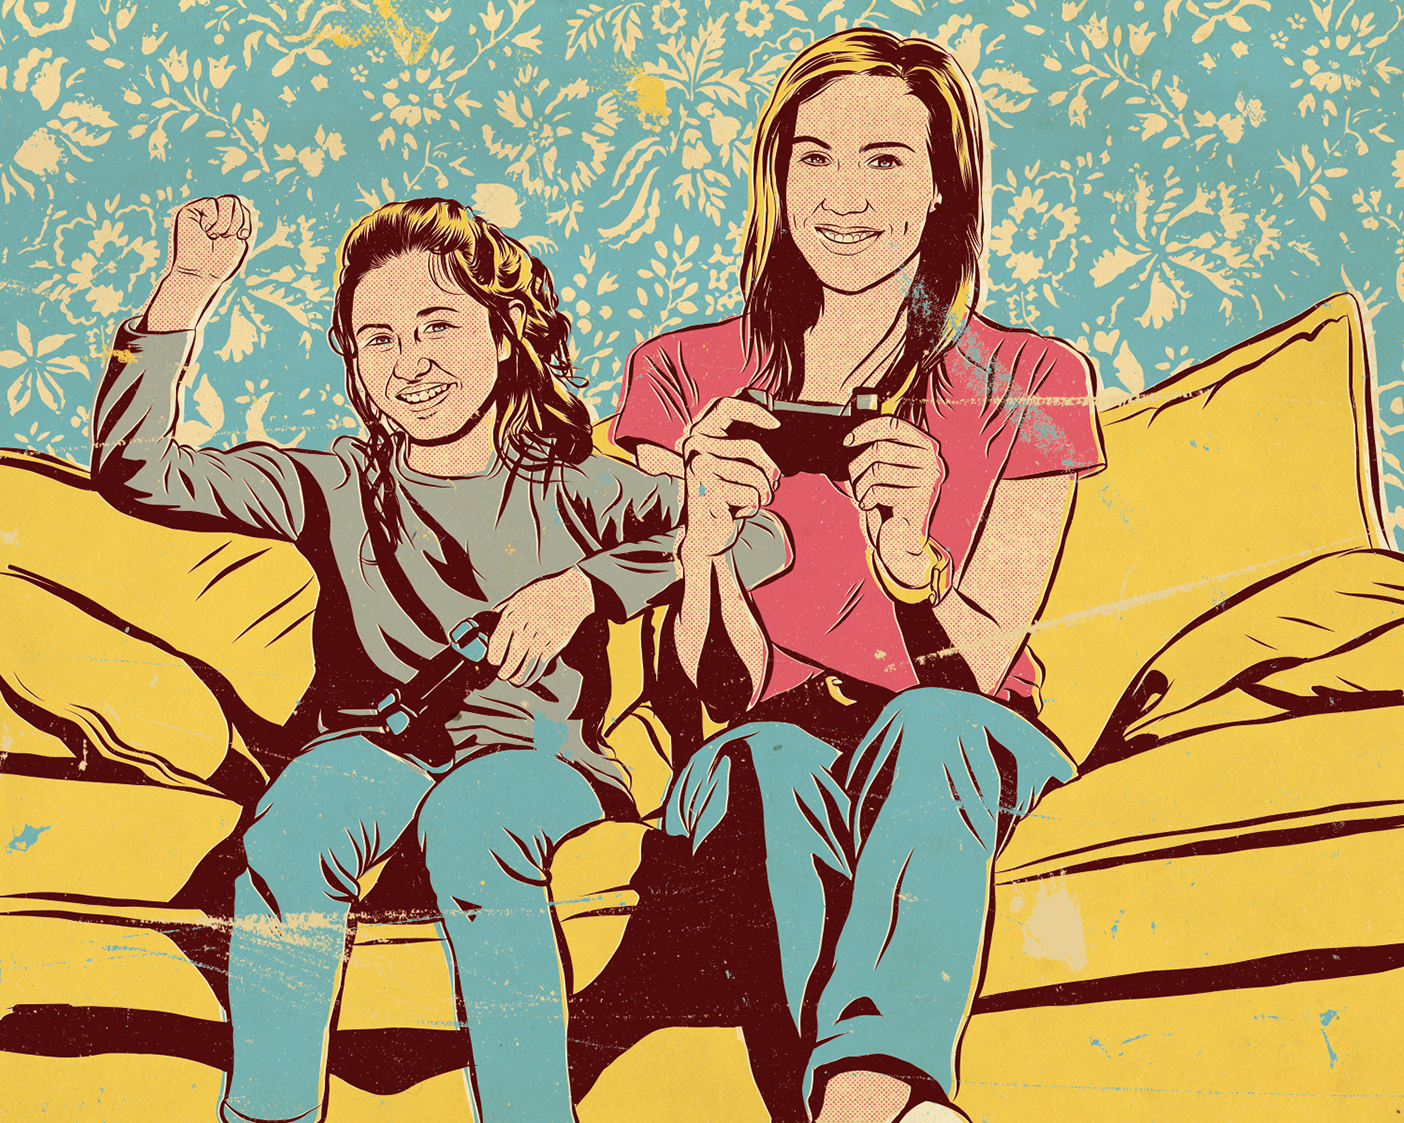 An illustration of a mother and daughter playing video games together.